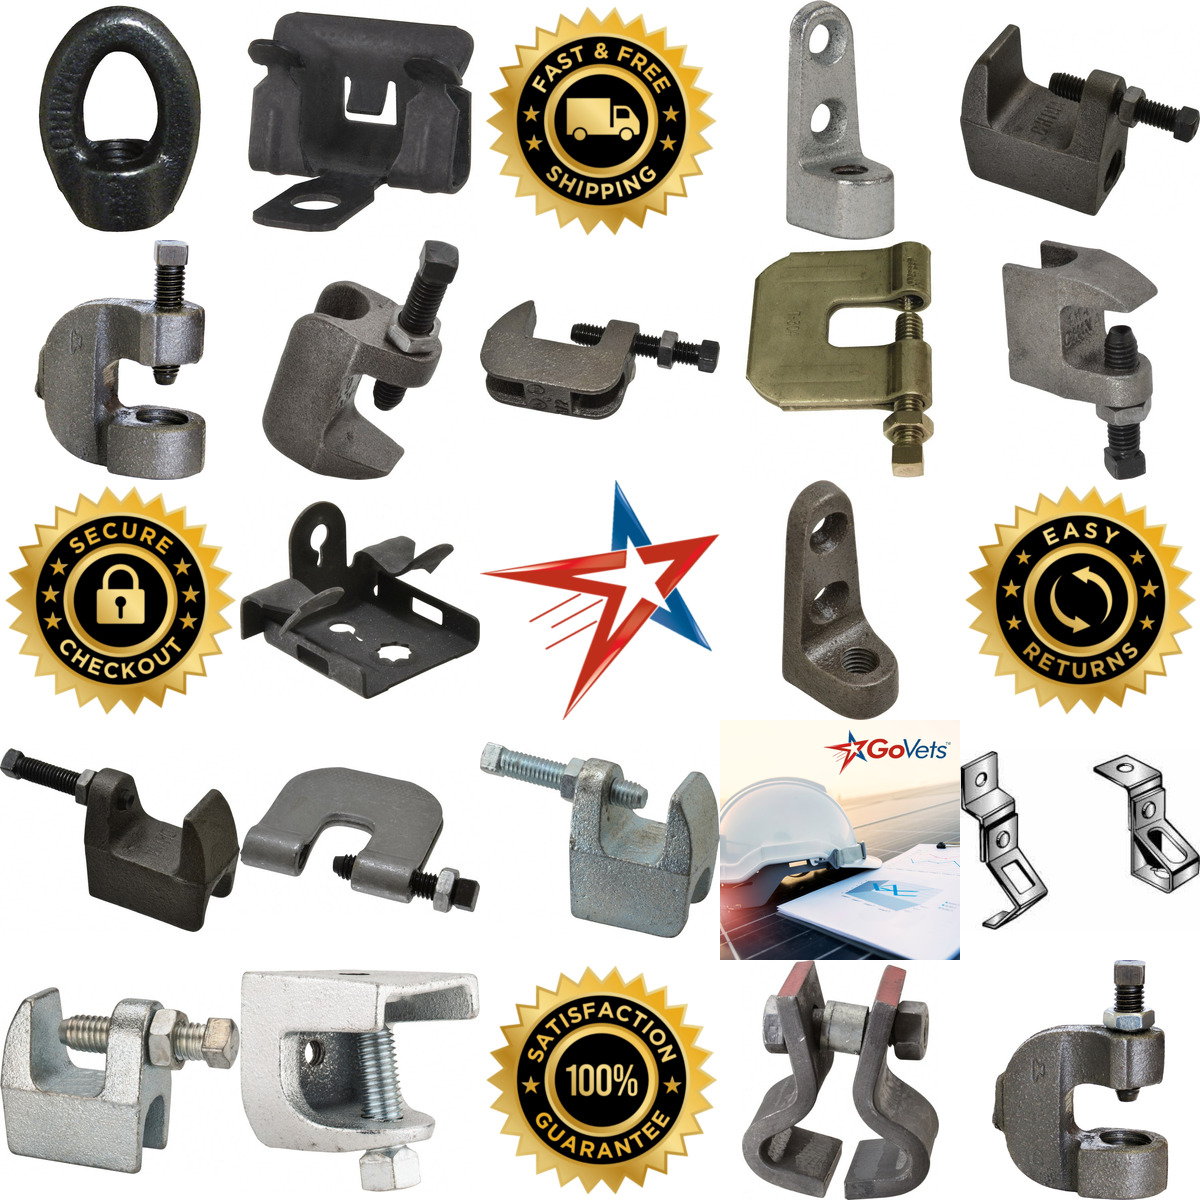 A selection of Beam Clamps and c Clamps products on GoVets